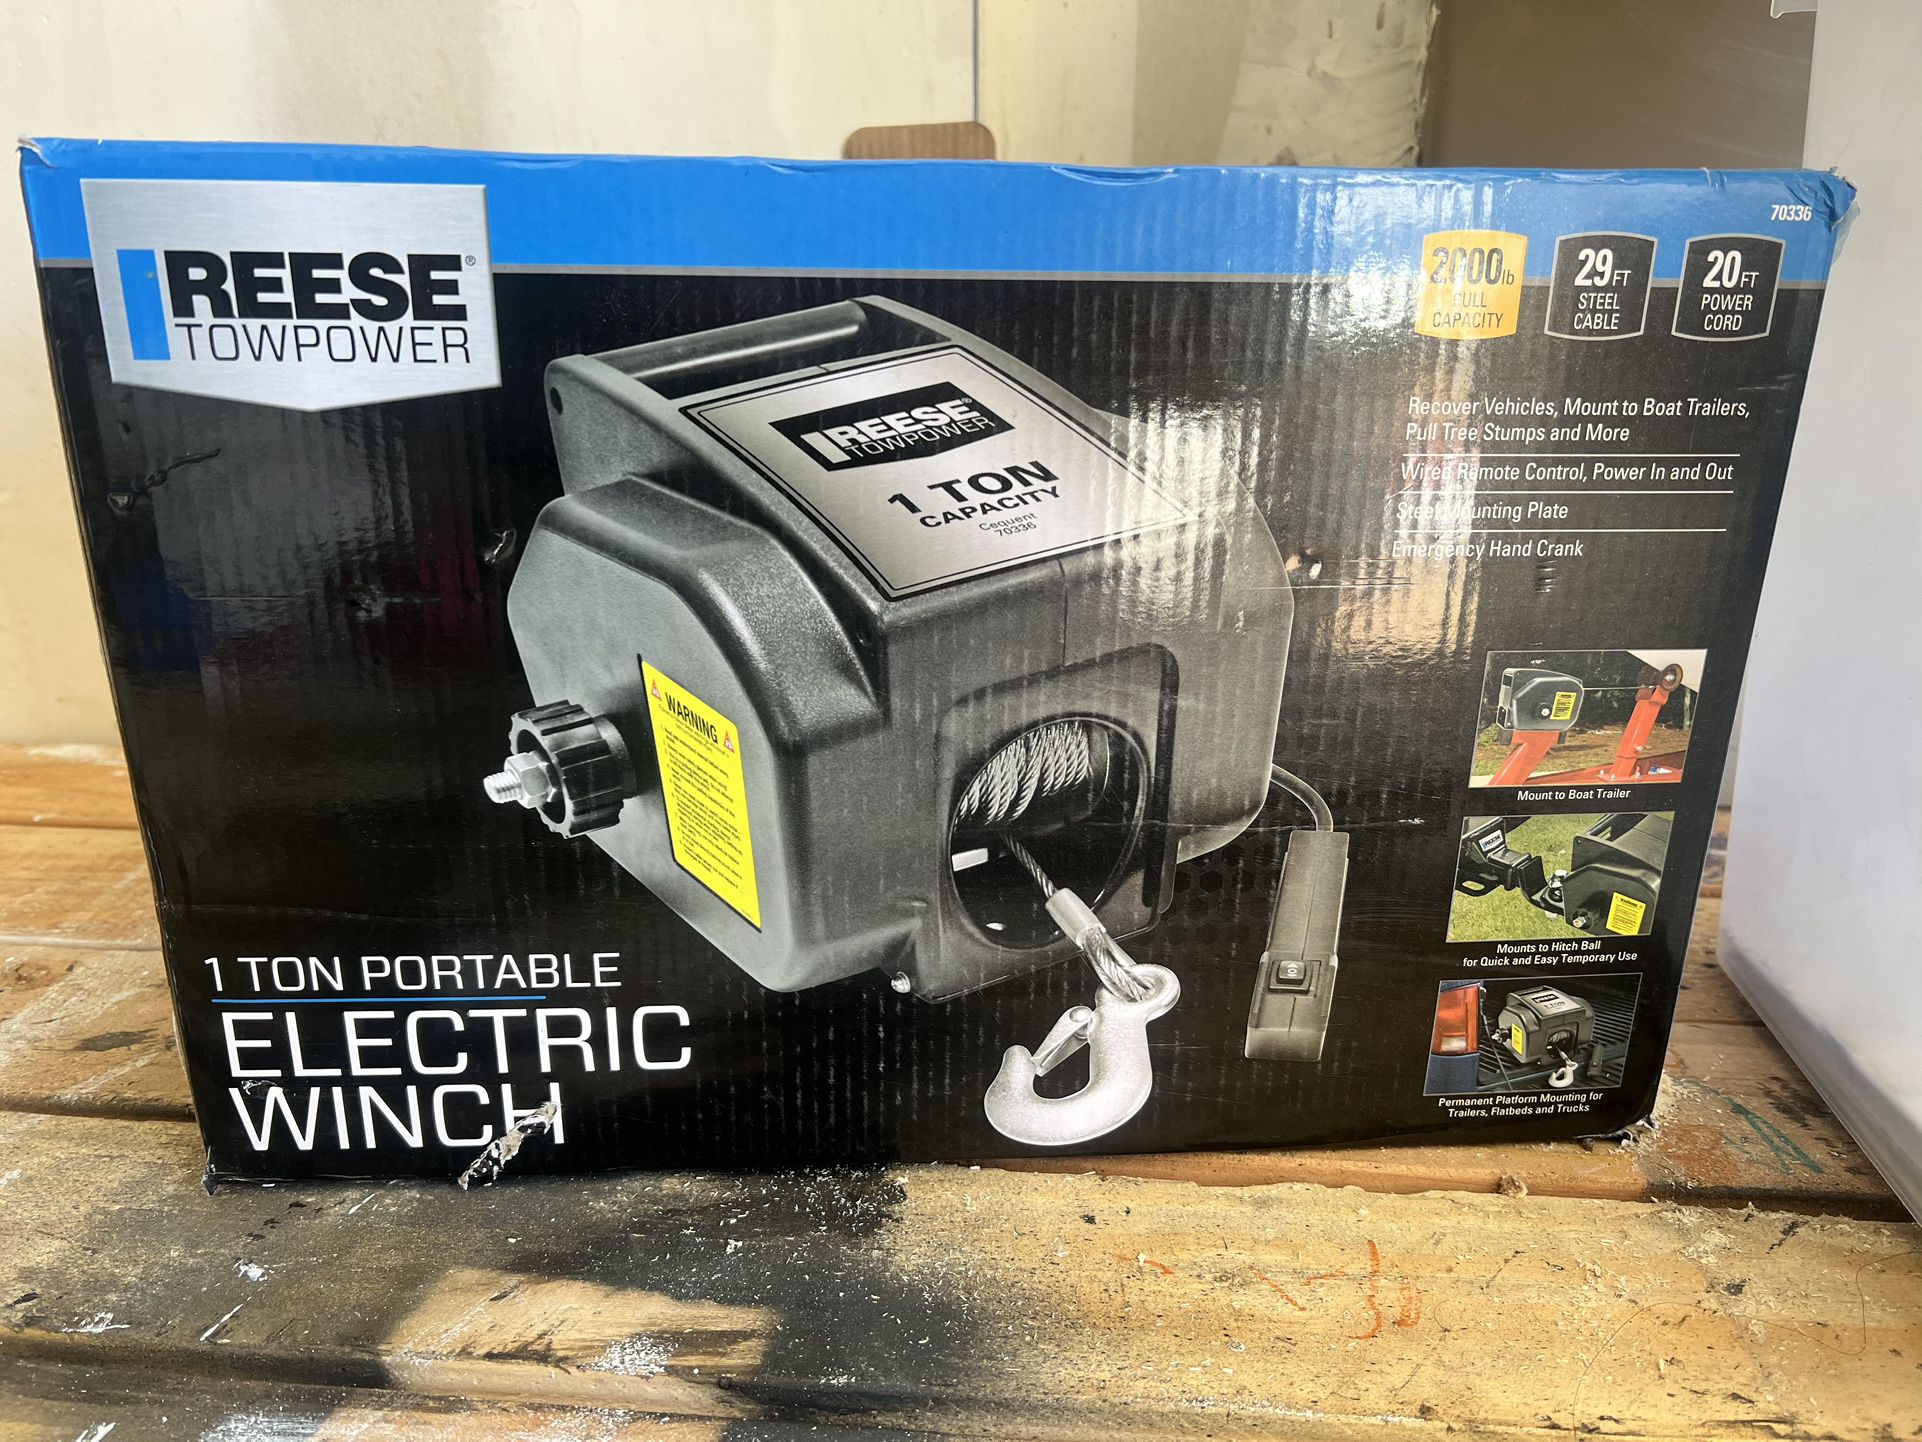 reese towpower 1 ton portable electric winch manual